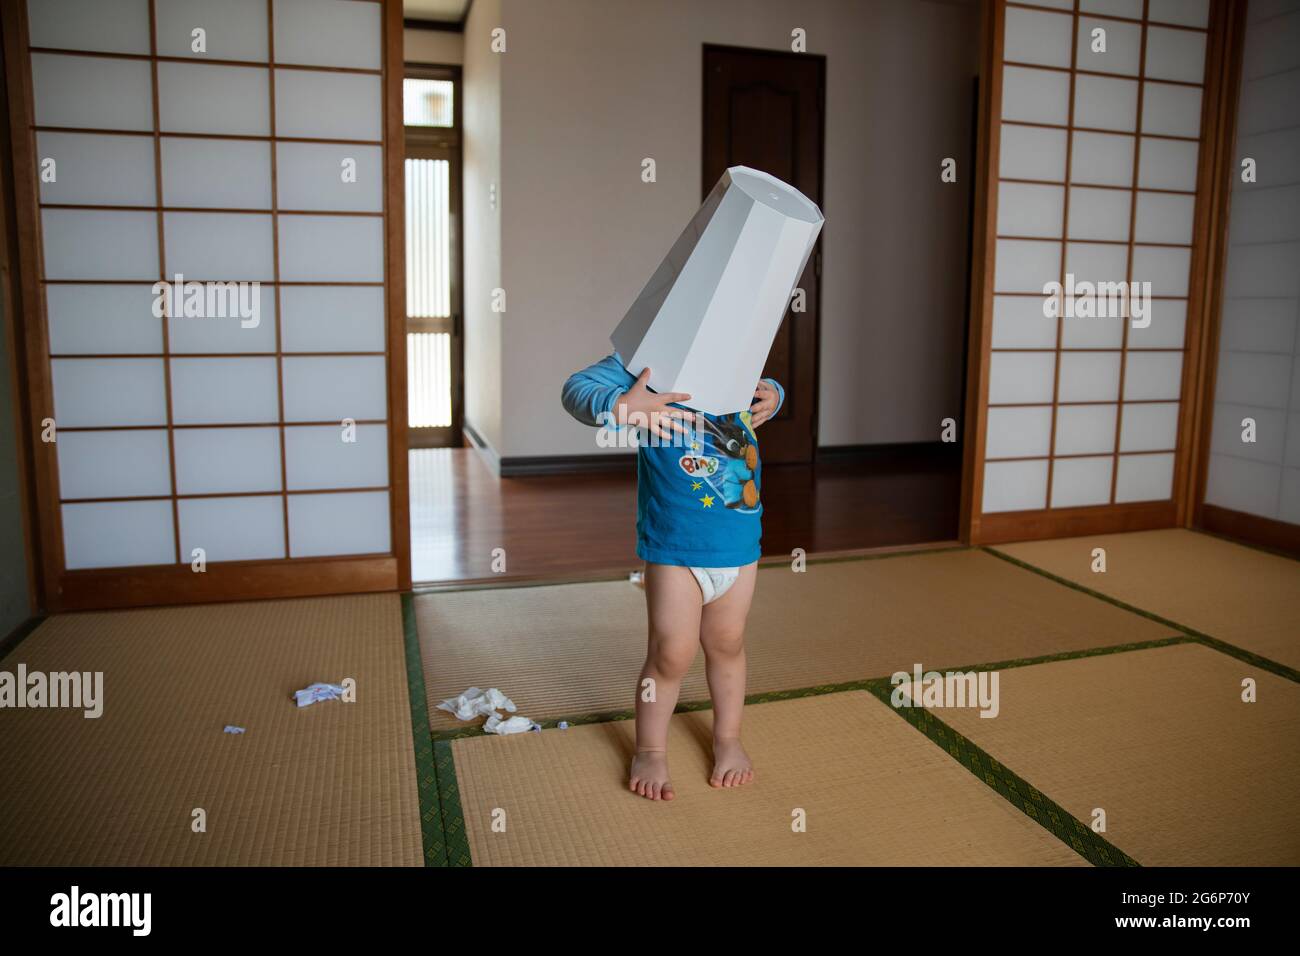 A young boy playing with a rubbish bin in a tatami room in Japan Stock Photo